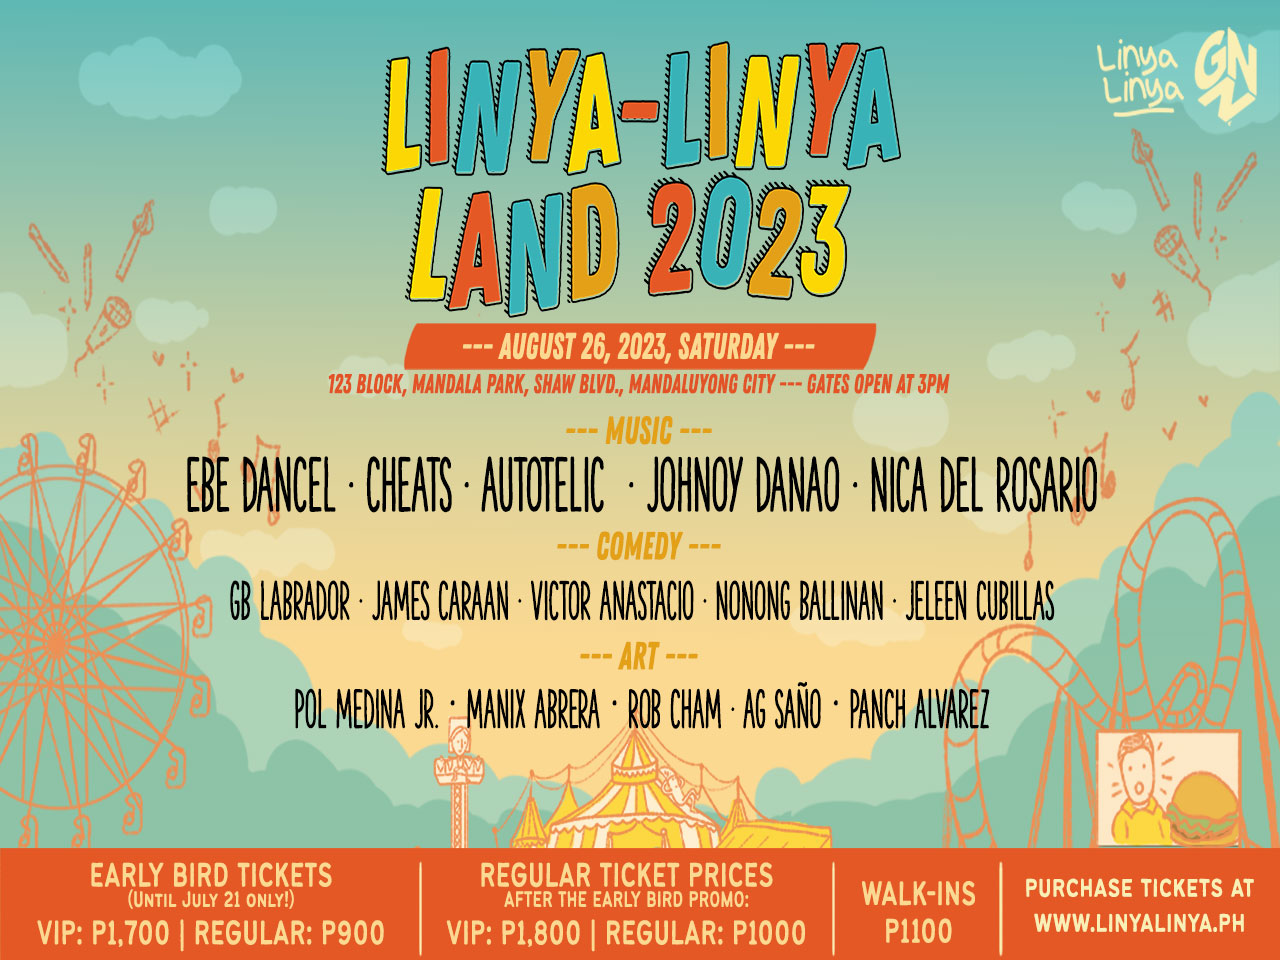 Linya-Linya Land 2023 Returns with the Biggest Names in Music, Comedy, and Art.